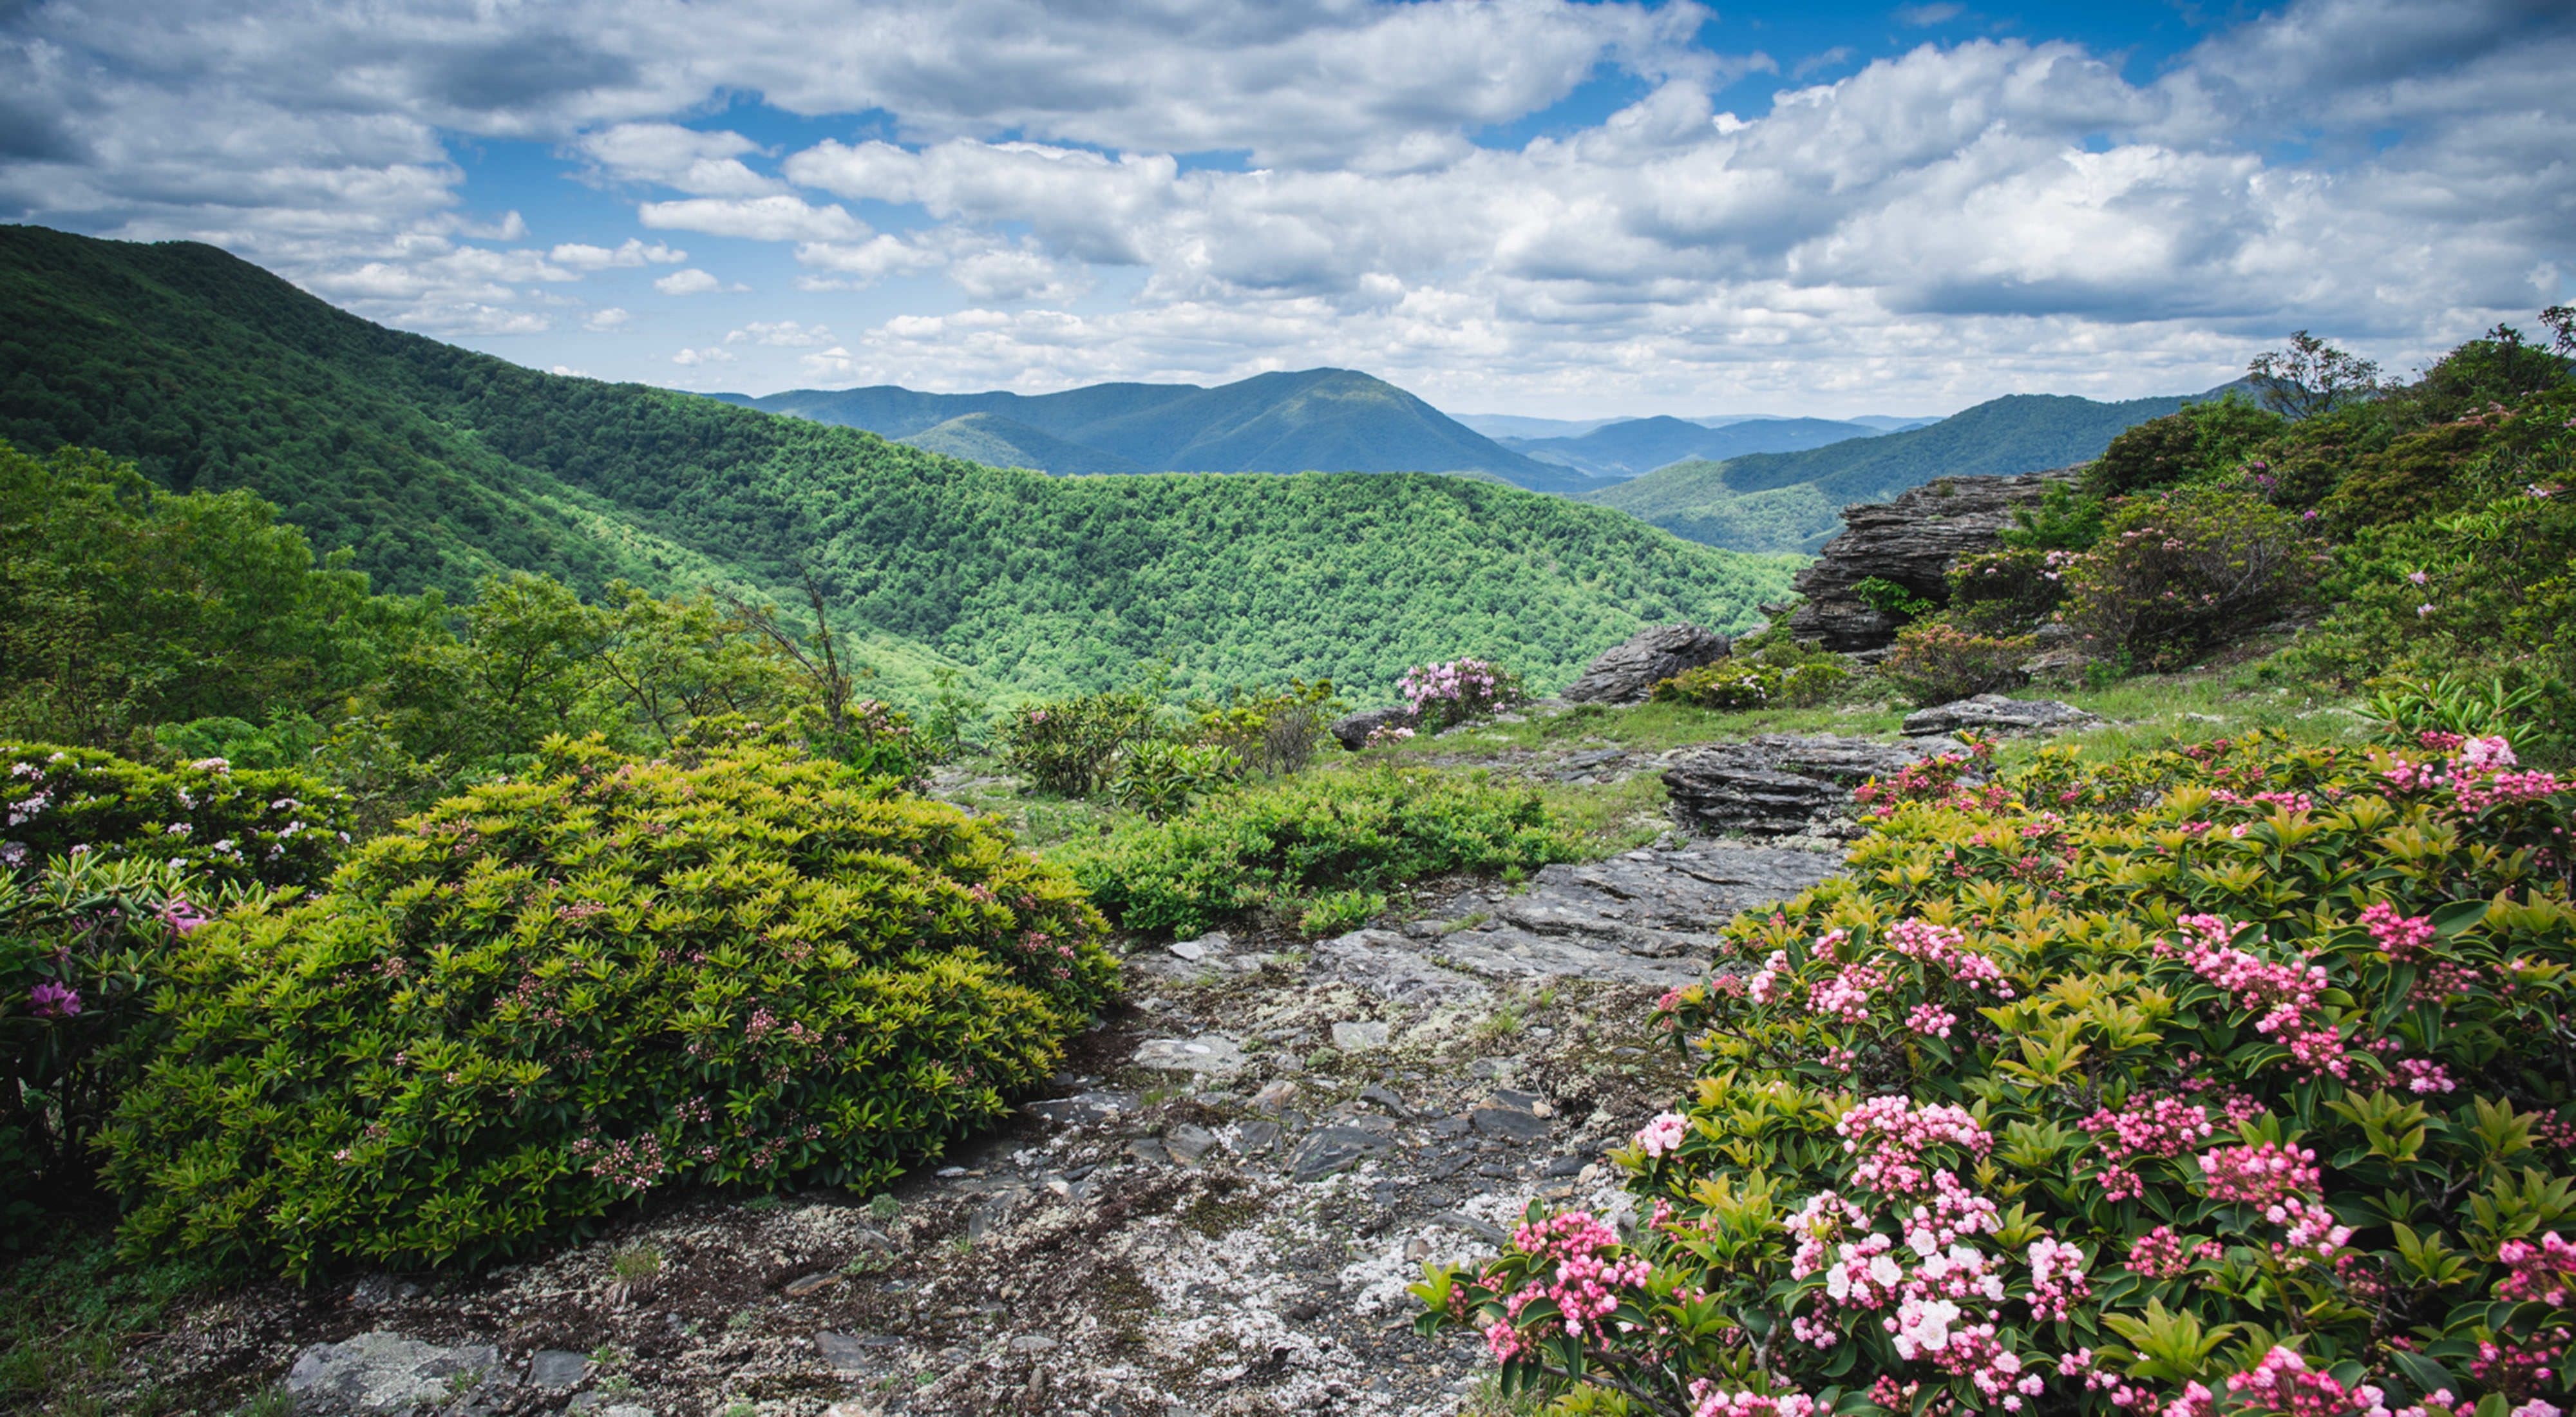 Rocky outcrops, green hills and shrubs blooming with pink flowers at Bluff Mountain Preserve.